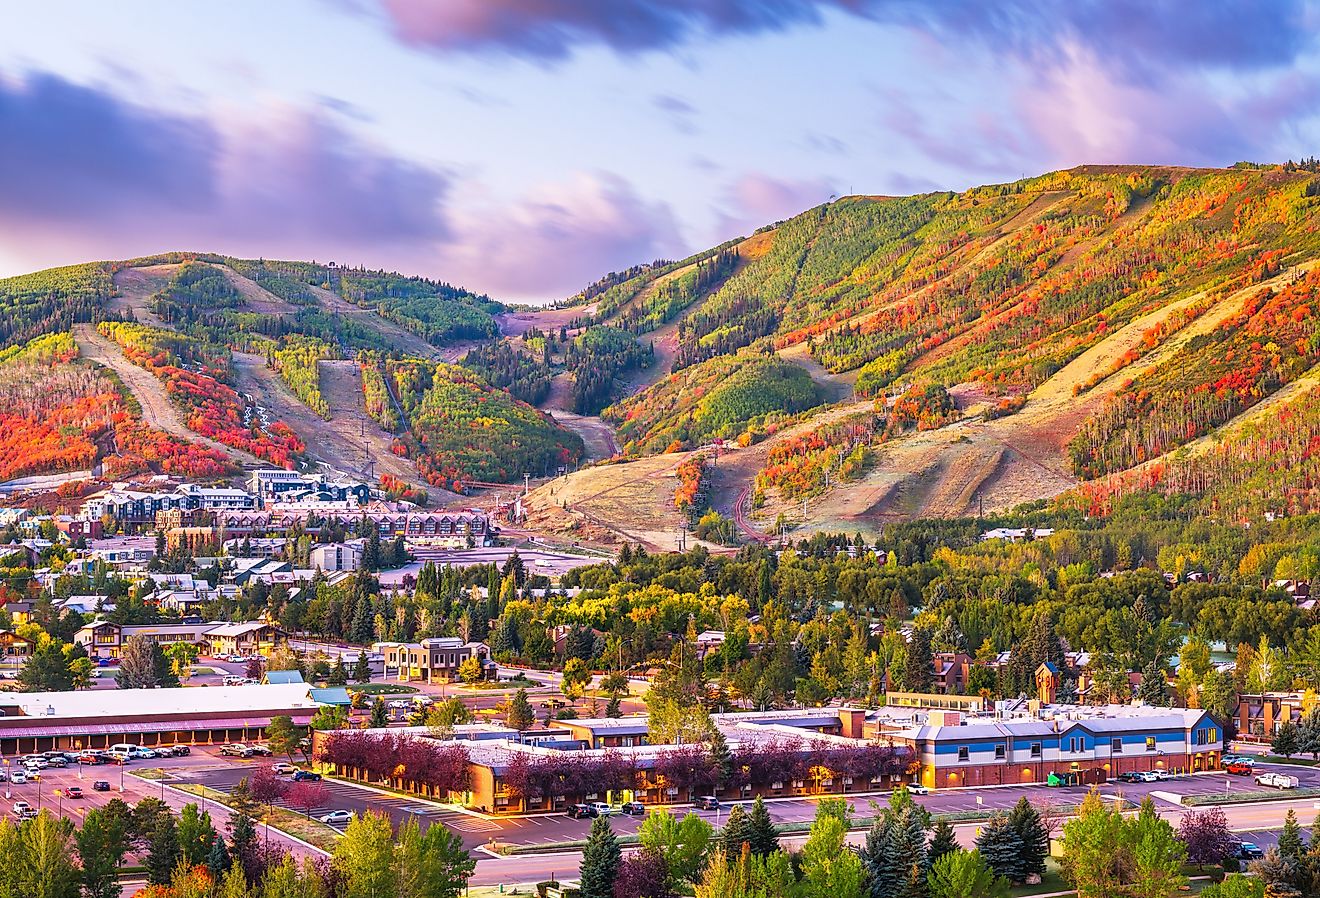 Overlooking downtown Park City, Utah, in autumn with vibrant colors.